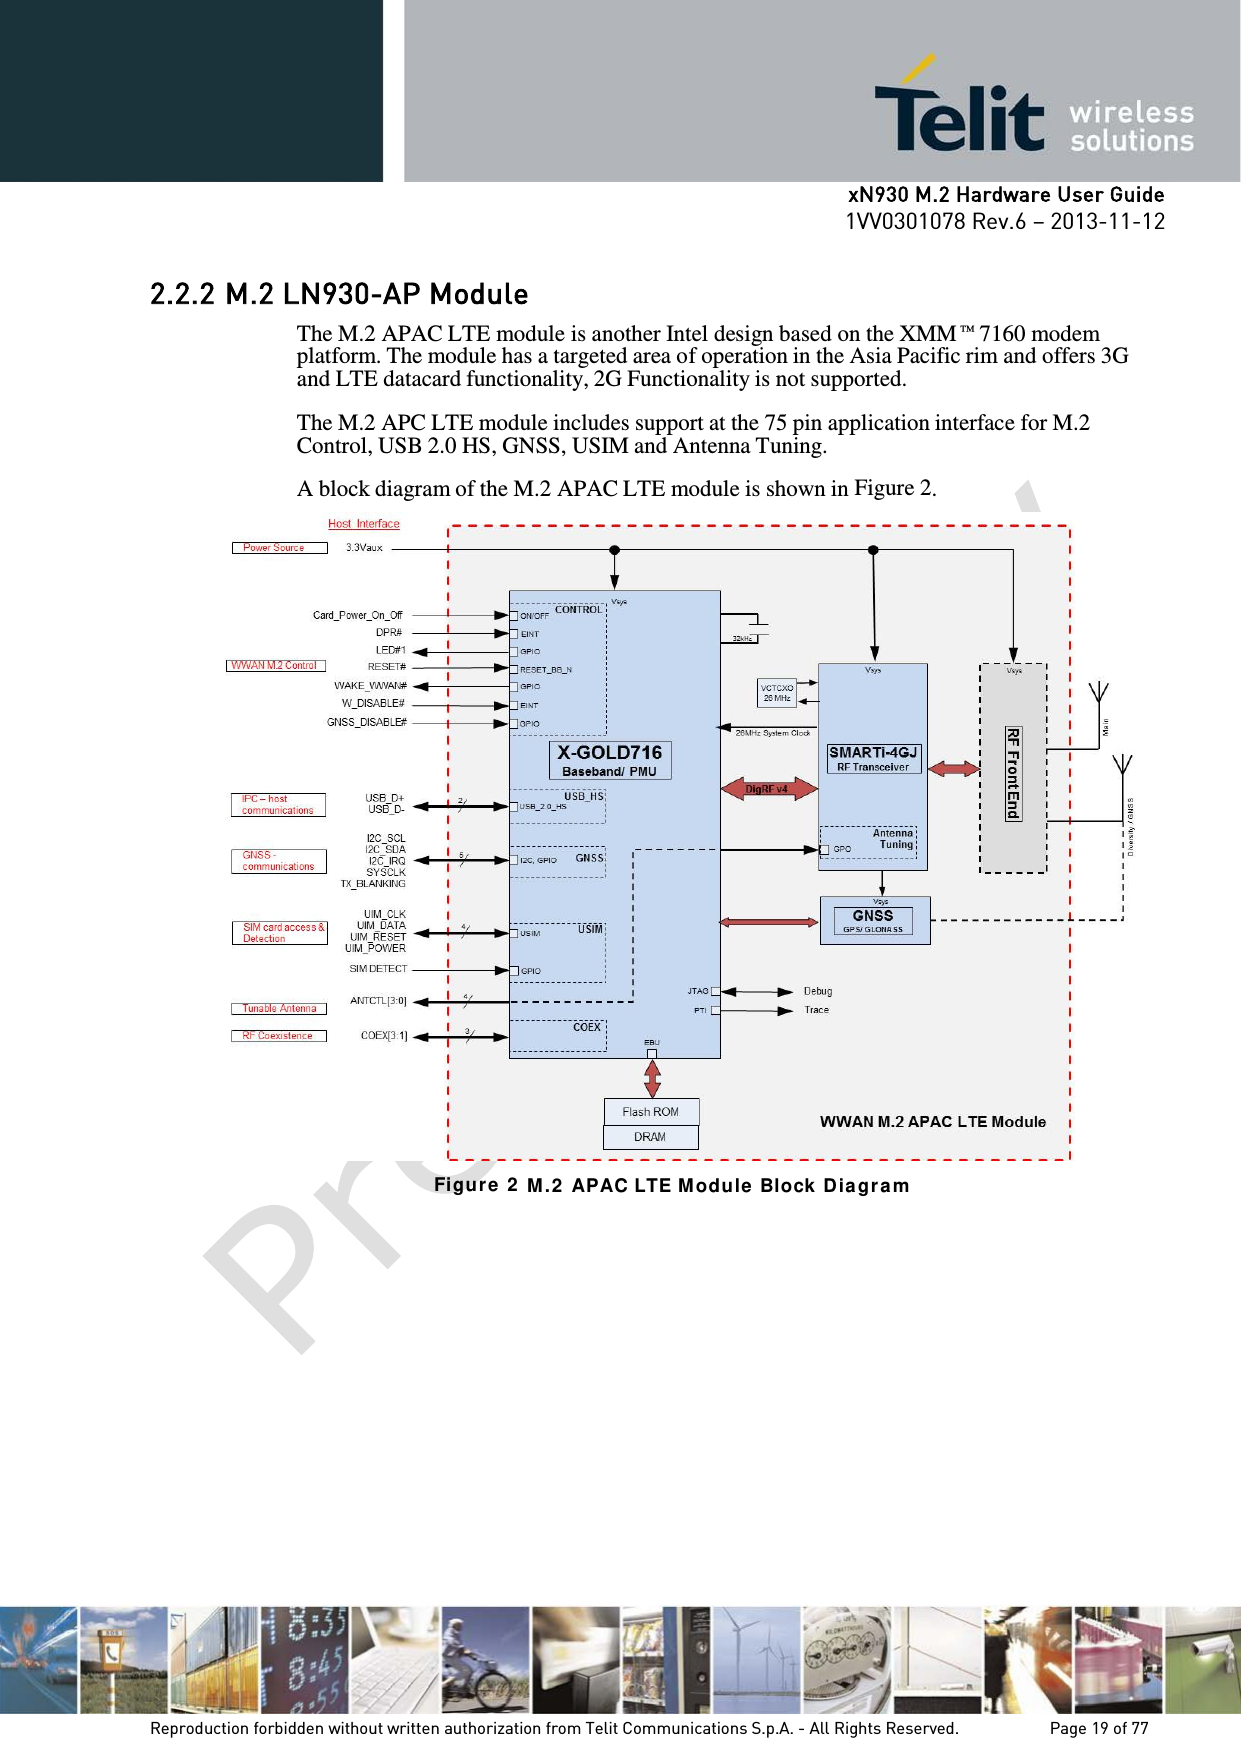      xN930 M.2 Hardware User Guide 1VV0301078 Rev.6 – 2013-11-12    2.2.2 M.2 LN930-AP Module The M.2 APAC LTE module is another Intel design based on the XMM™7160 modem platform. The module has a targeted area of operation in the Asia Pacific rim and offers 3G and LTE datacard functionality, 2G Functionality is not supported.  The M.2 APC LTE module includes support at the 75 pin application interface for M.2 Control, USB 2.0 HS, GNSS, USIM and Antenna Tuning.  A block diagram of the M.2 APAC LTE module is shown in Figure 2.  Figur e 2  M .2  APAC LTE M odu le  Block Dia gr am      Reproduction forbidden without written authorization from Telit Communications S.p.A. - All Rights Reserved.    Page 19 of 77 